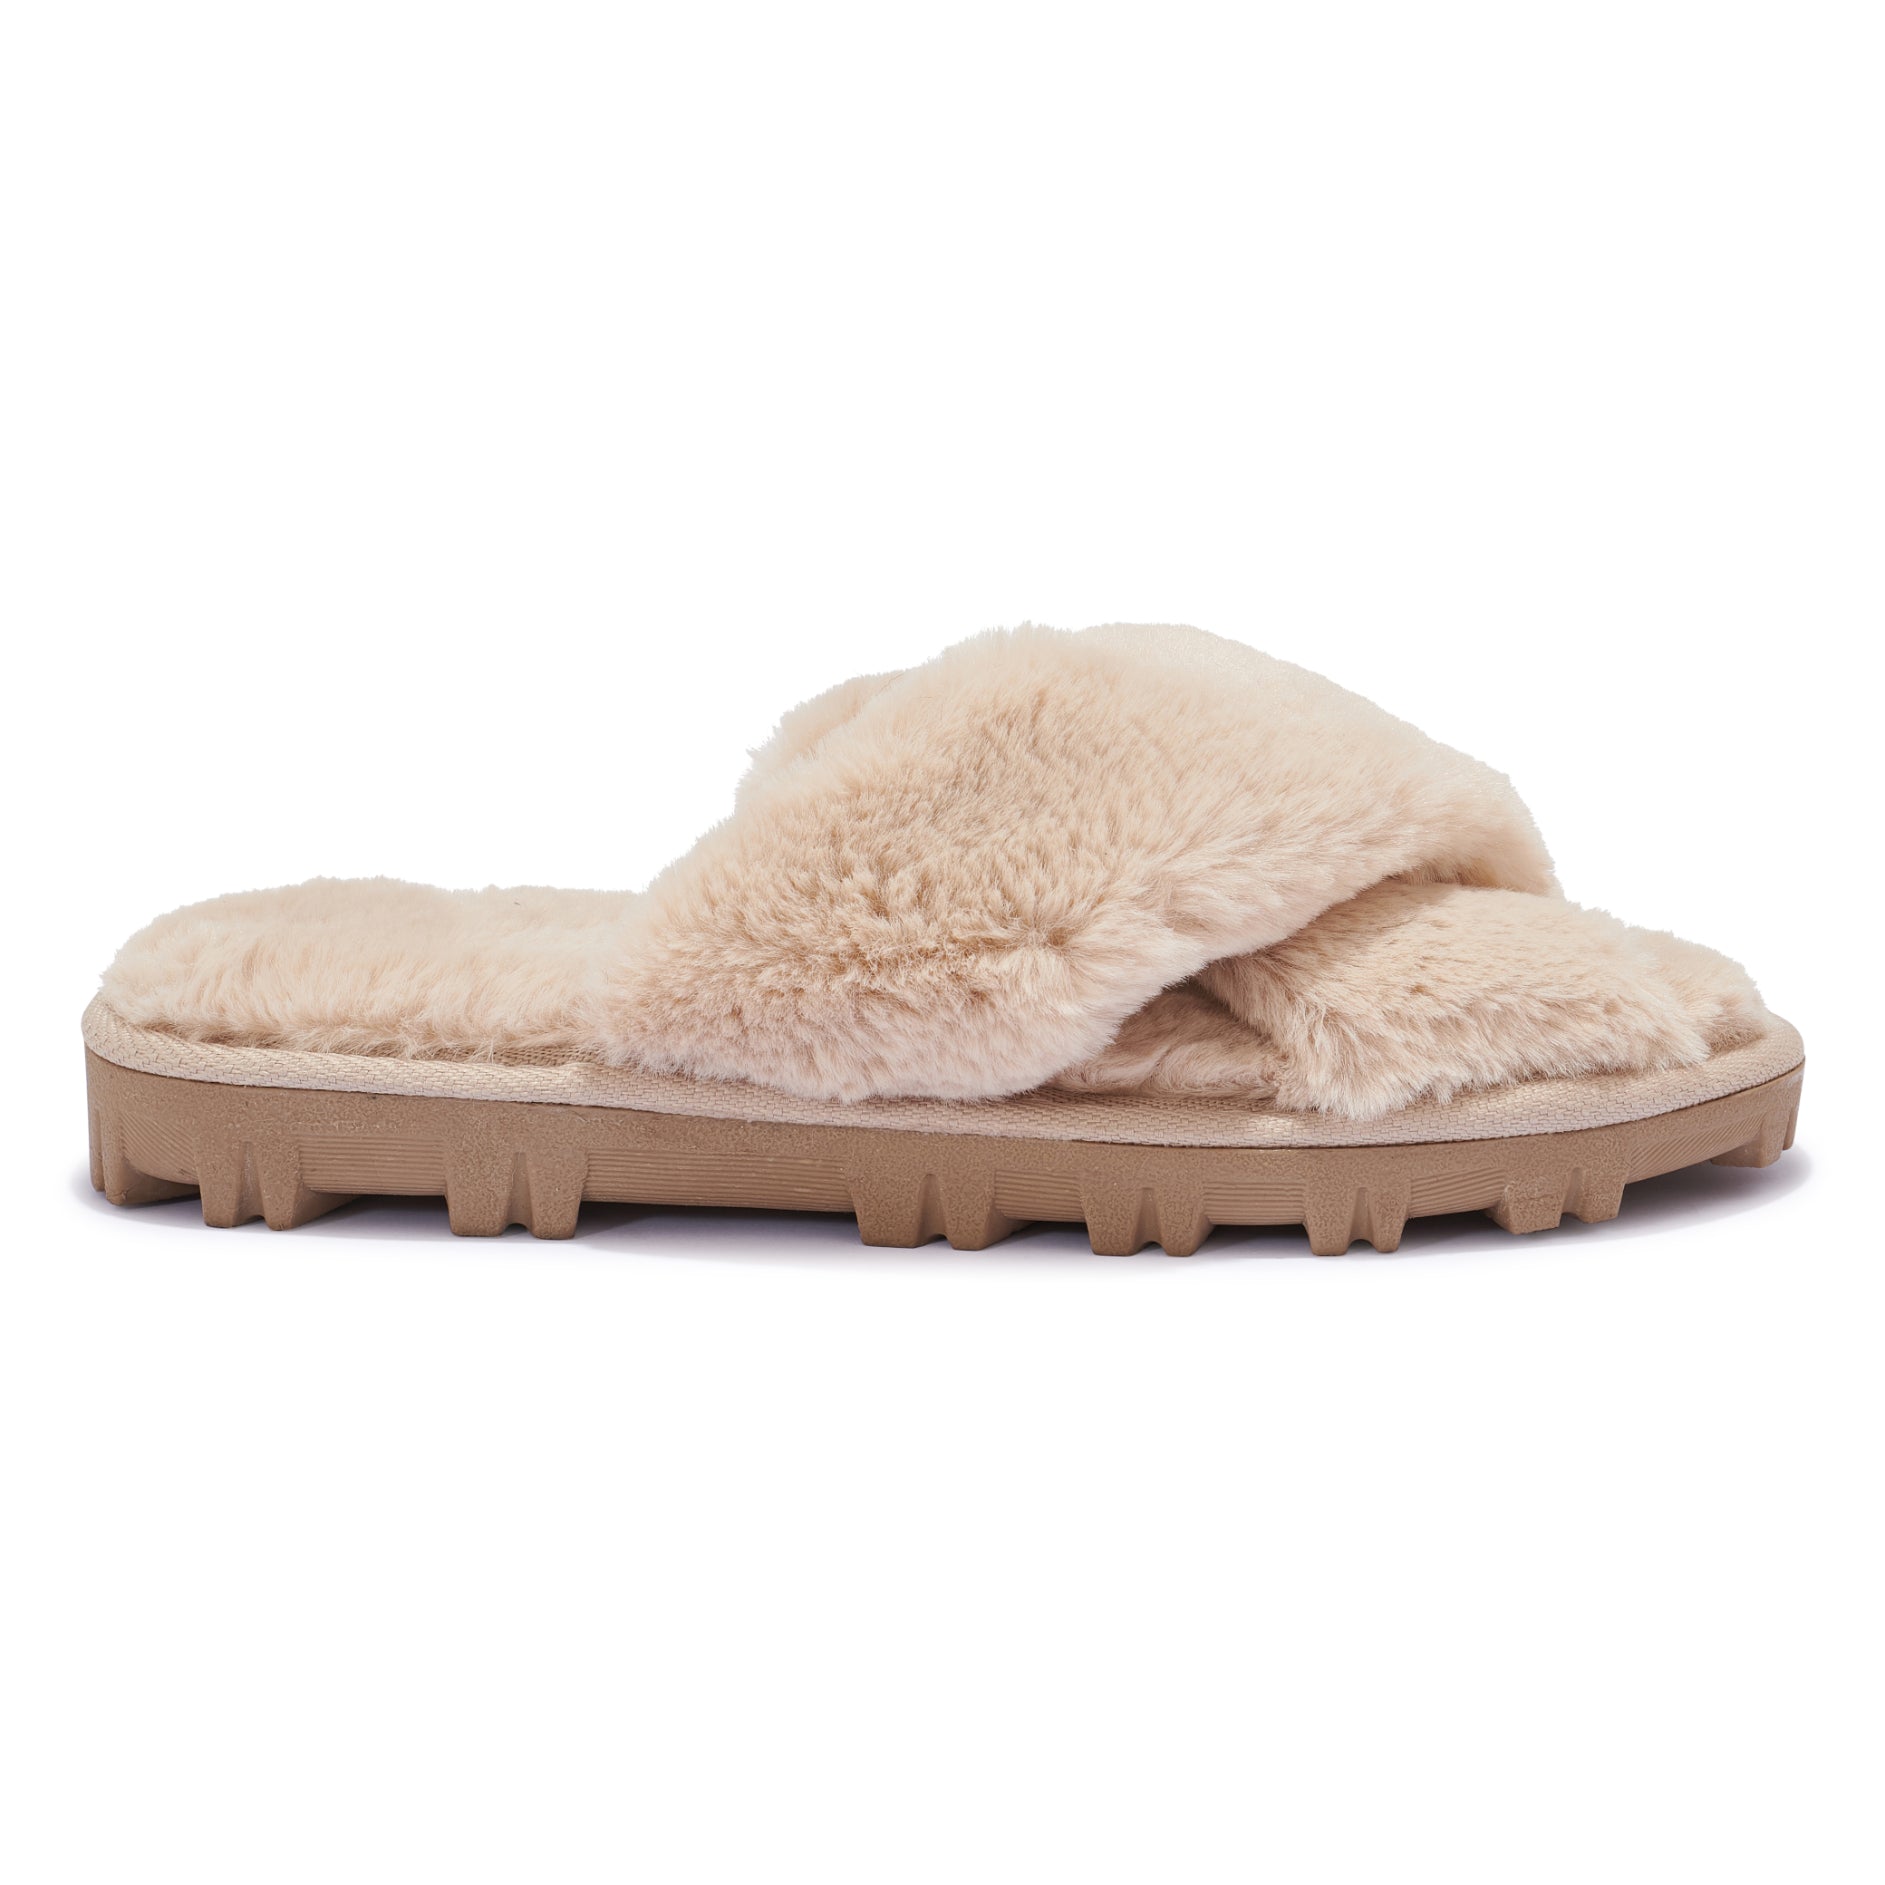 CARMELO5 - CROSSOVER DOUBLE STRAP FAUX FUR SLIPPERS